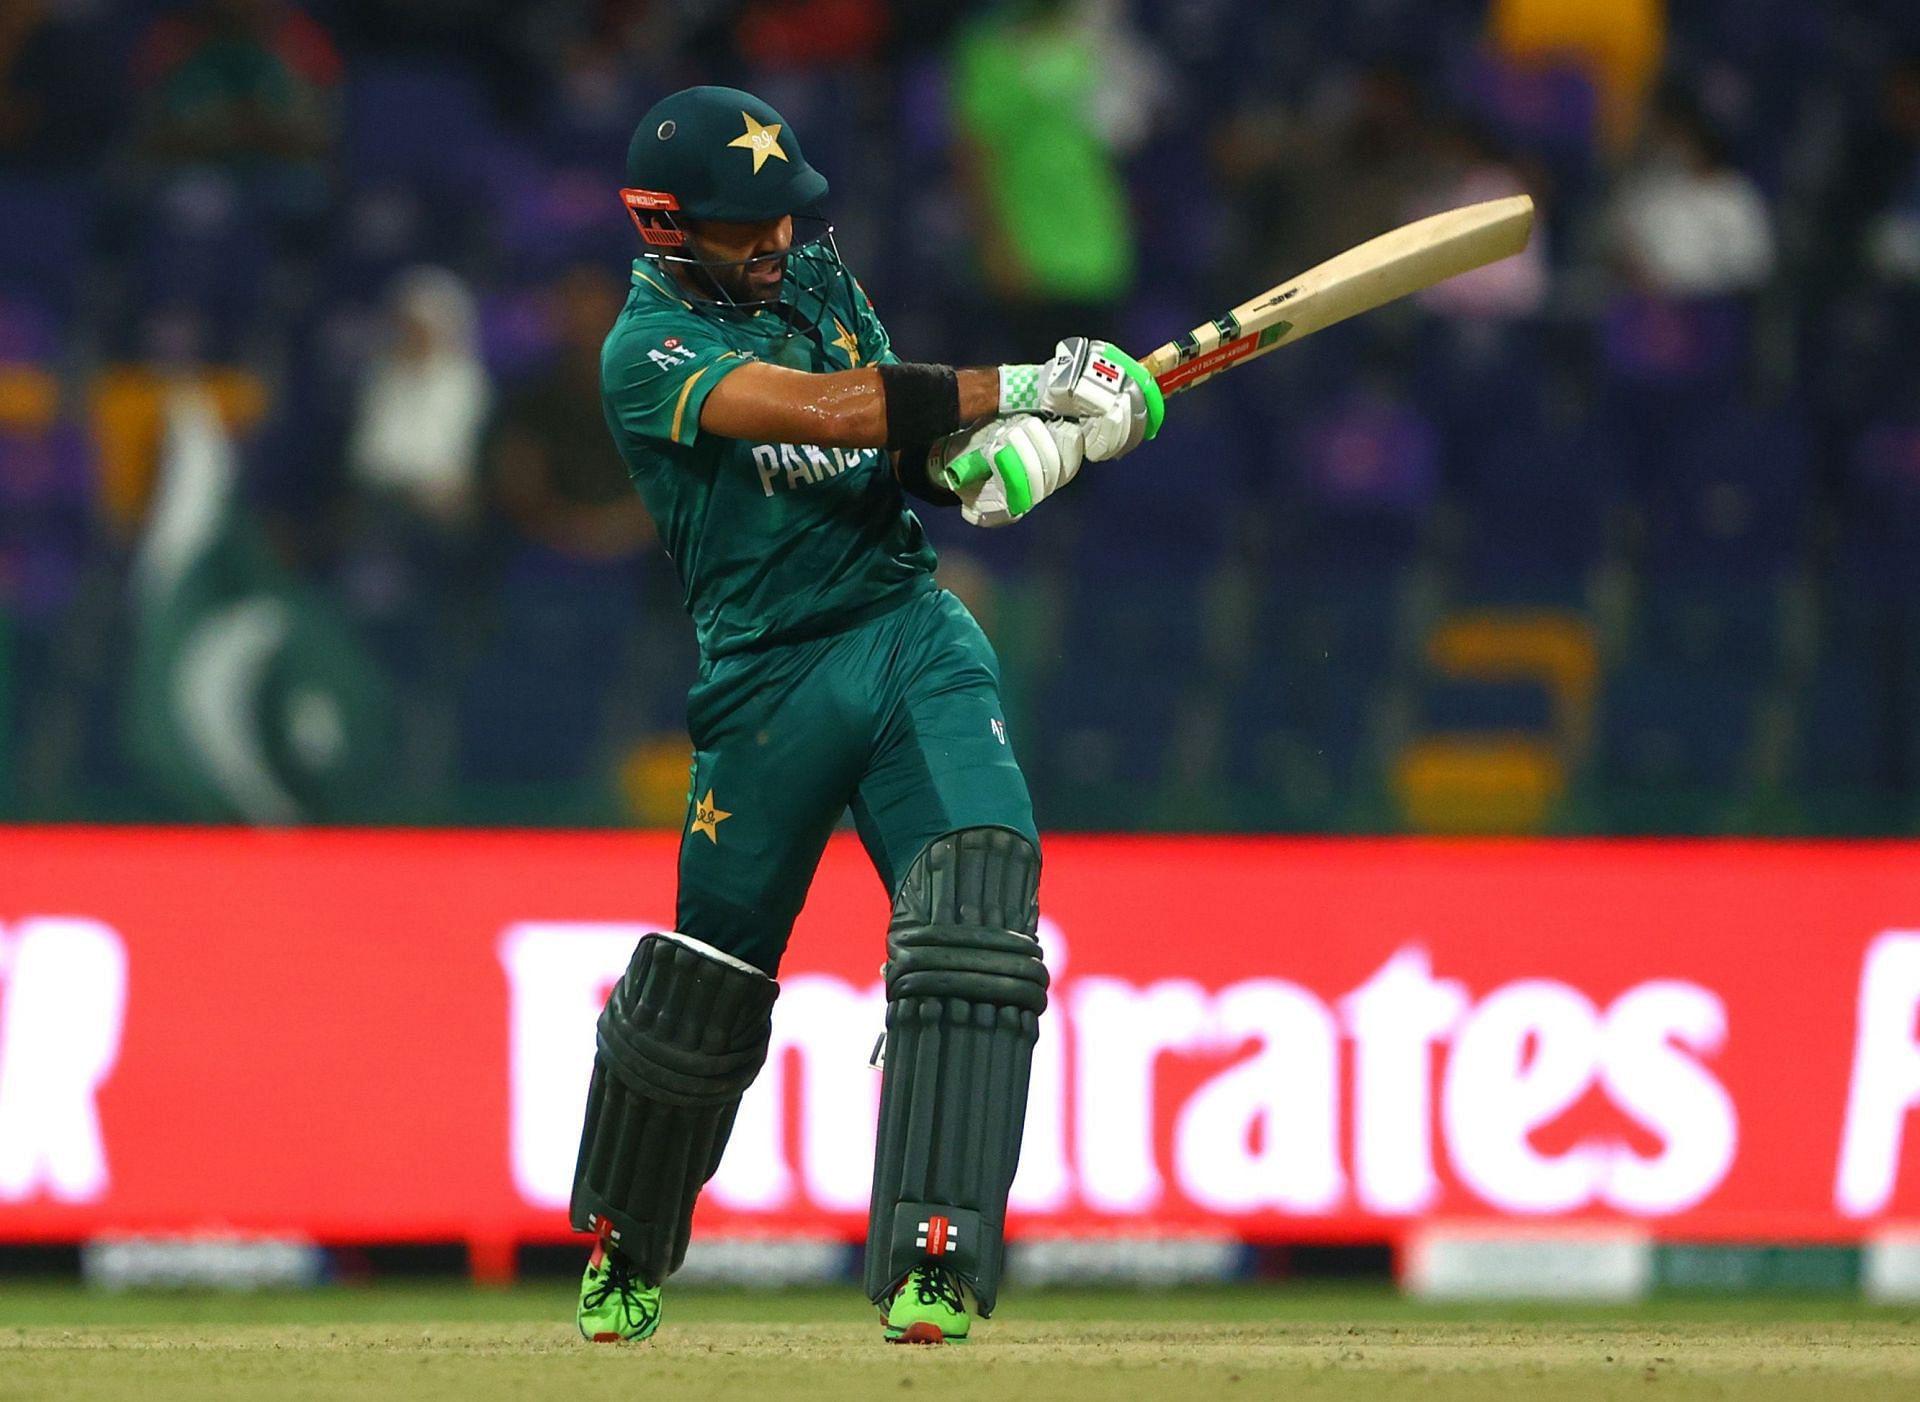 Mohammad Rizwan of Pakistan bats against Namibia. Pic: Getty Images